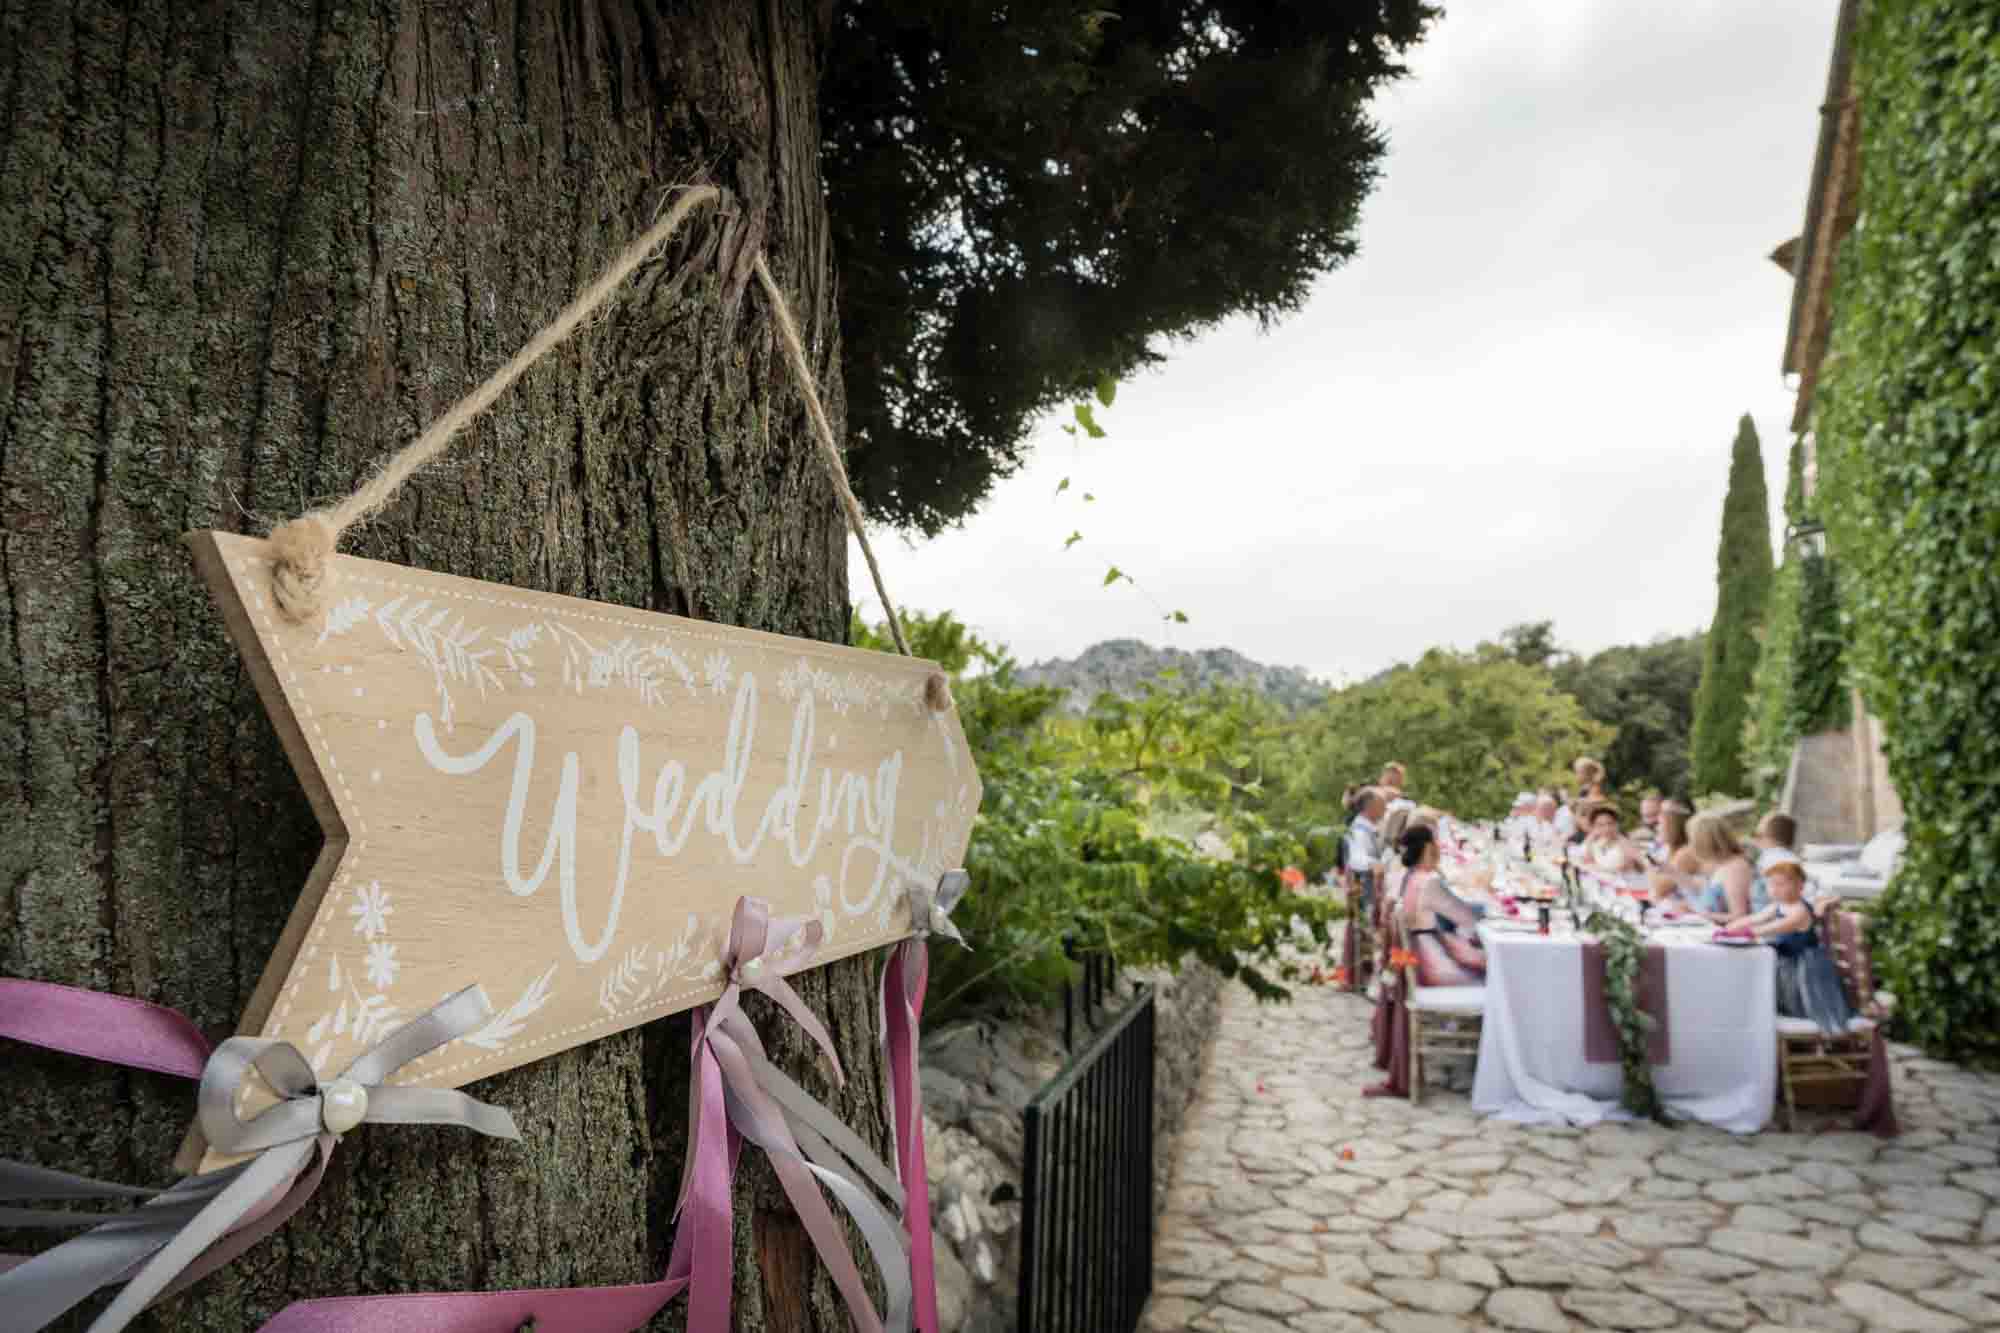 Guests enjoy a relaxed meal at an outdoor finca wedding